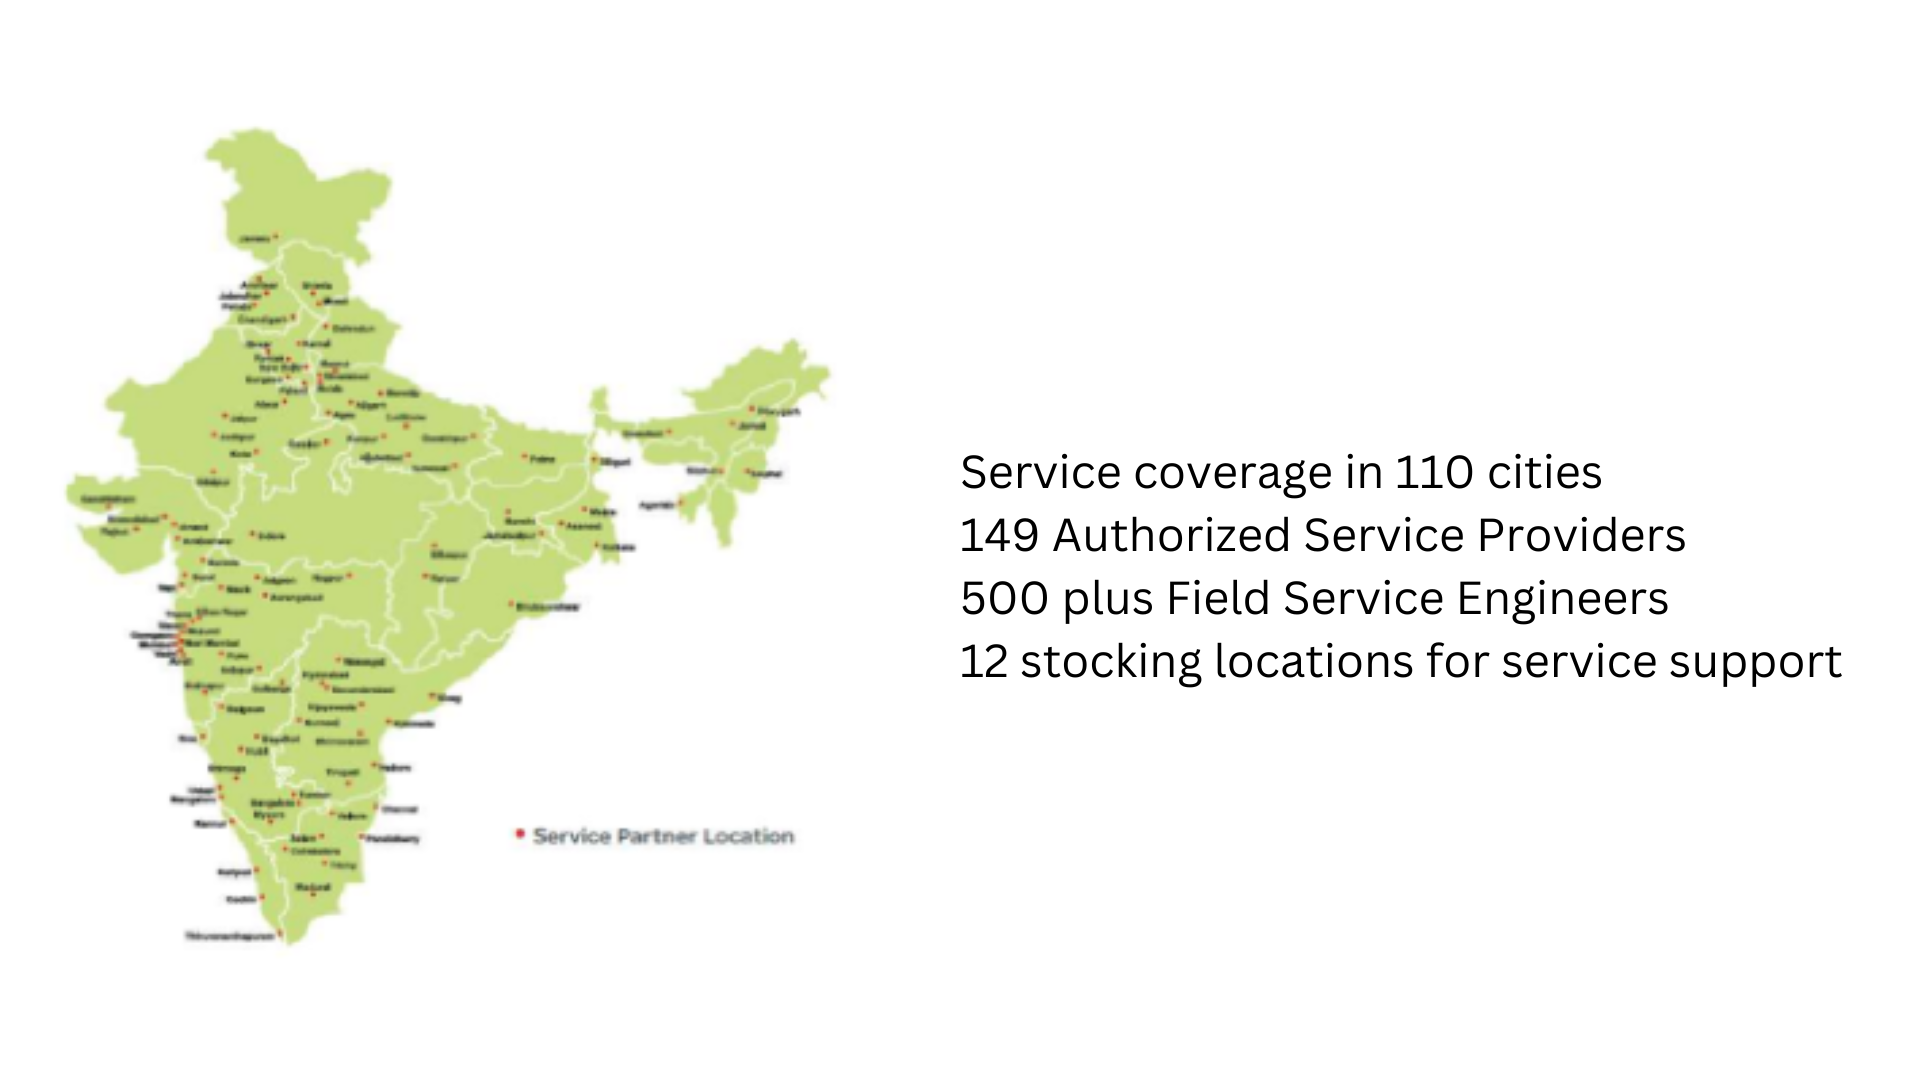 Service coverage in 110 cities 149 Authorized Service Providers 500 plus Field Service Engineers 12 stocking locations for service support